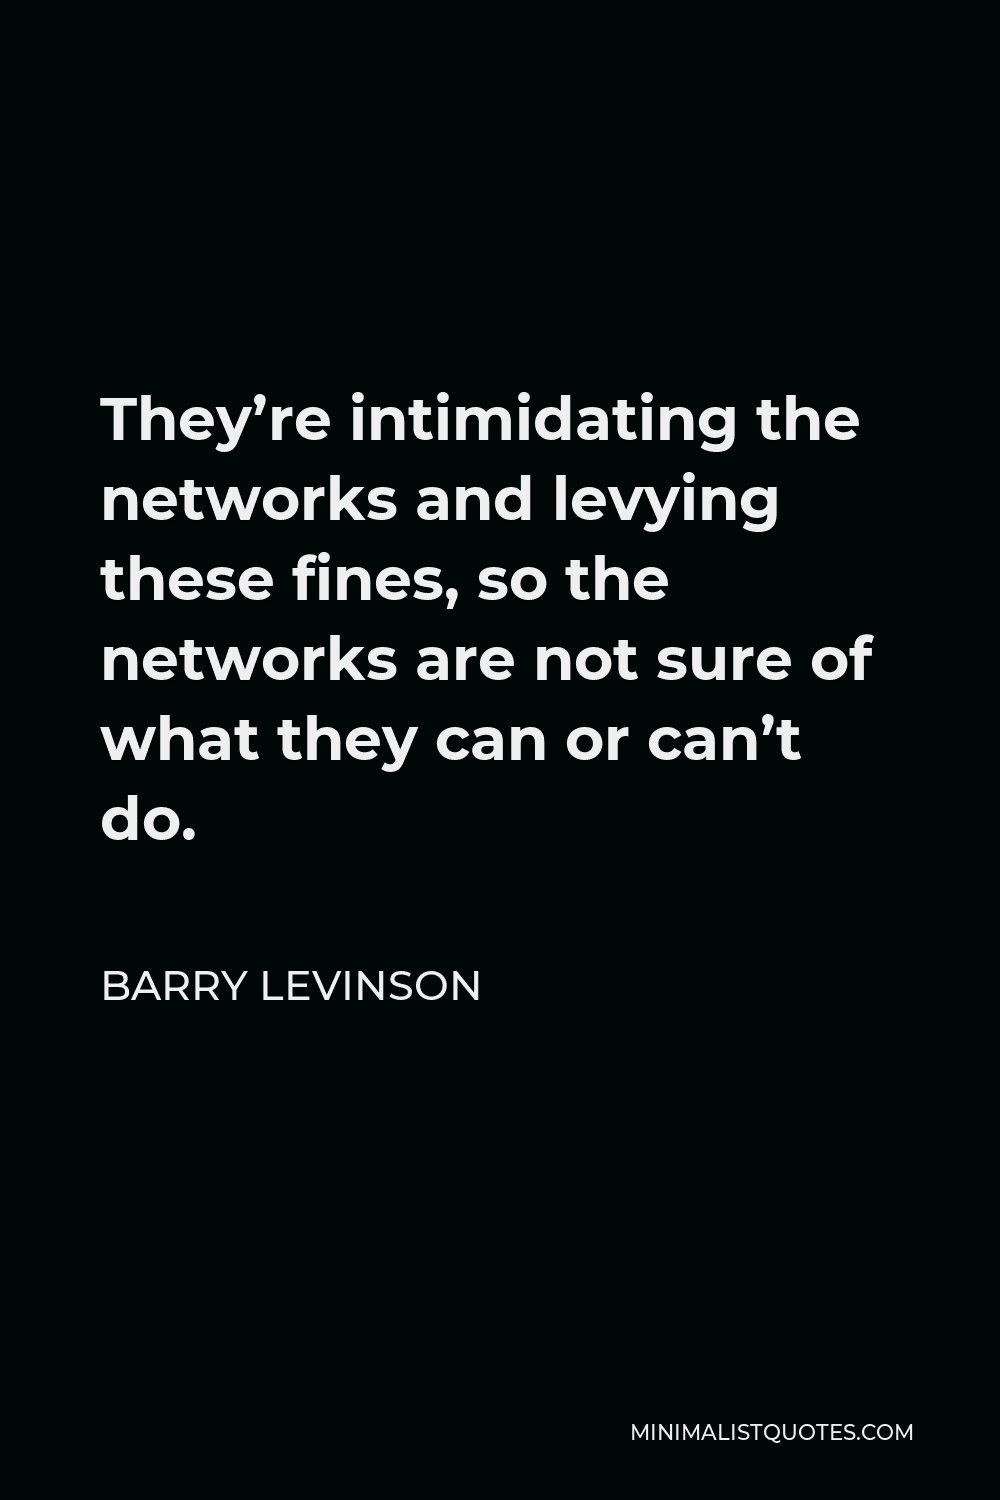 Barry Levinson Quote - They’re intimidating the networks and levying these fines, so the networks are not sure of what they can or can’t do.